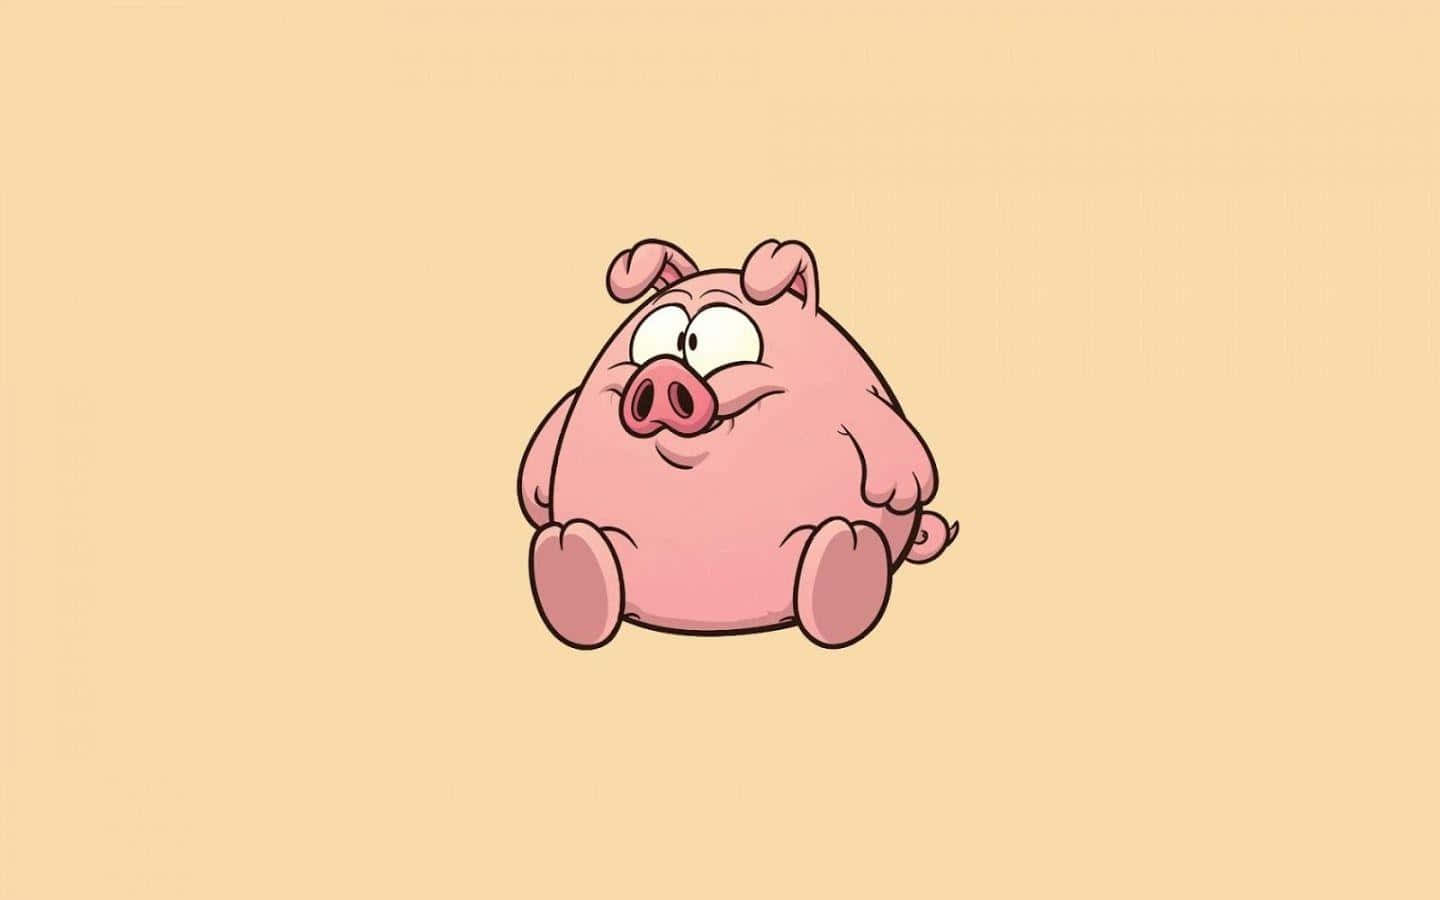 A Cartoon Pig Is Sitting On A Beige Background